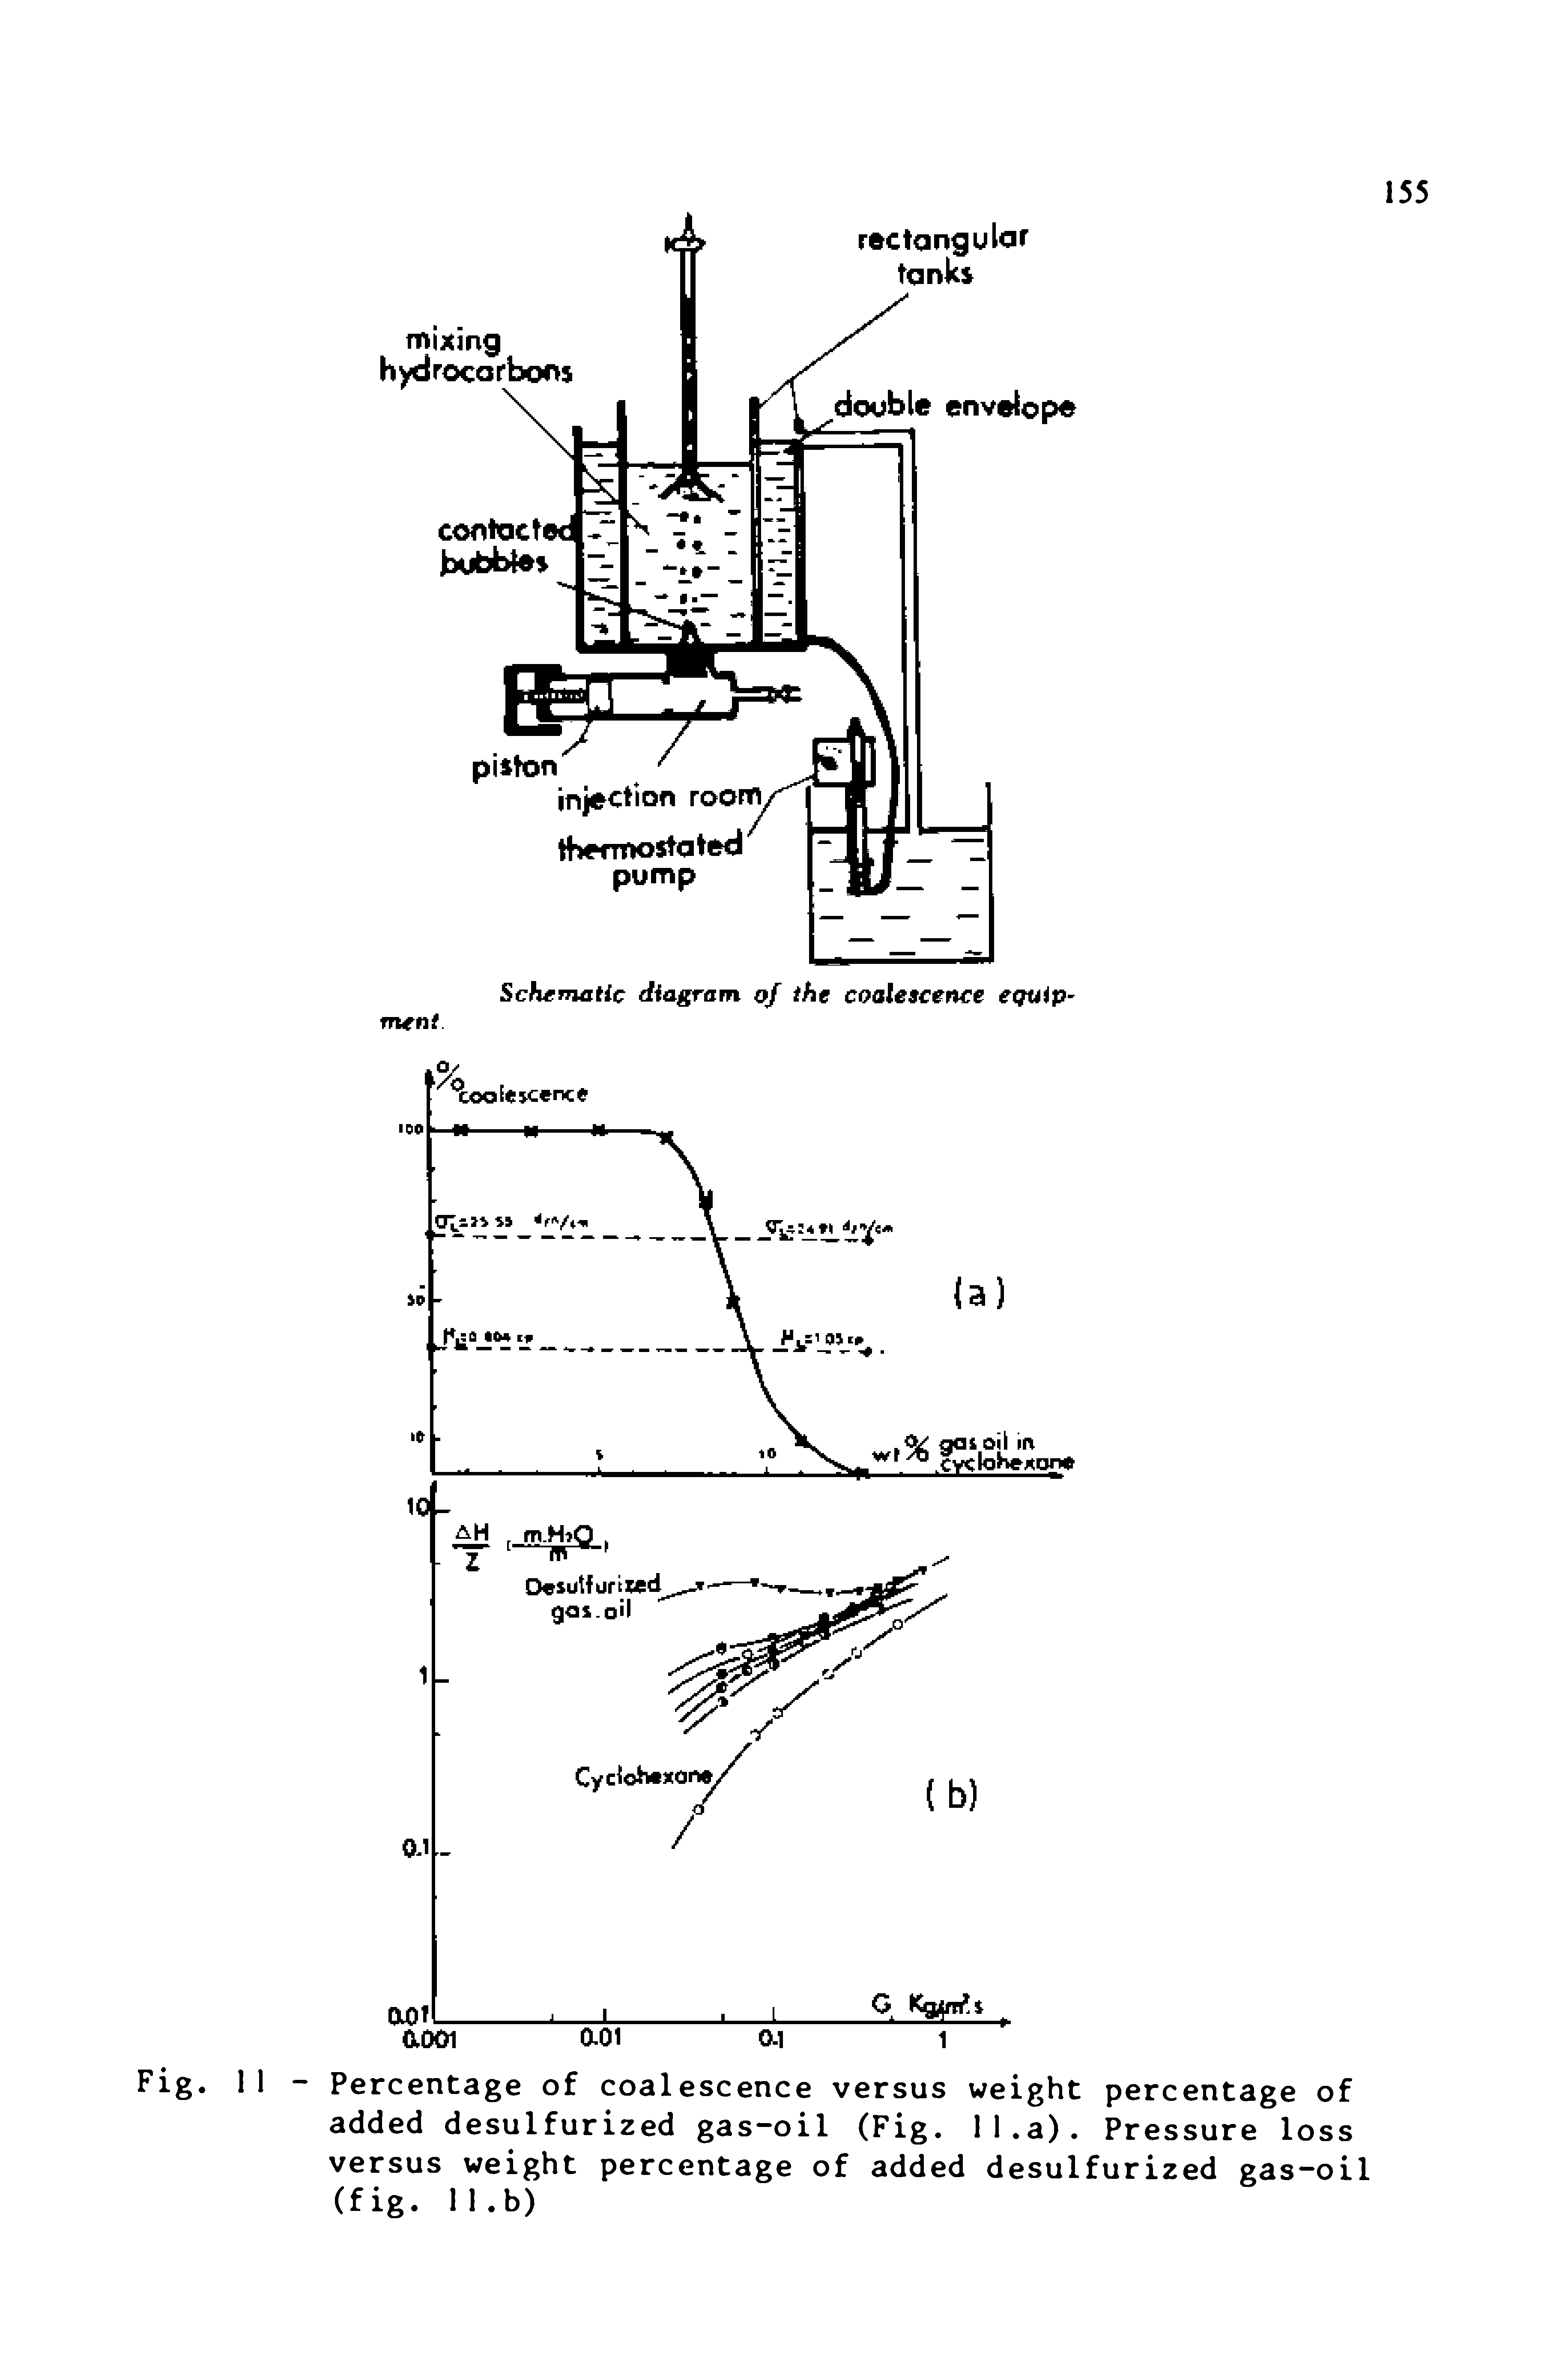 Fig. 11 - Percentage of coalescence versus weight percentage of added desulfurized gas-oil (Fig. 11.a). Pressure loss versus weight percentage of added desulfurized gas-oil (fig. 11.b)...